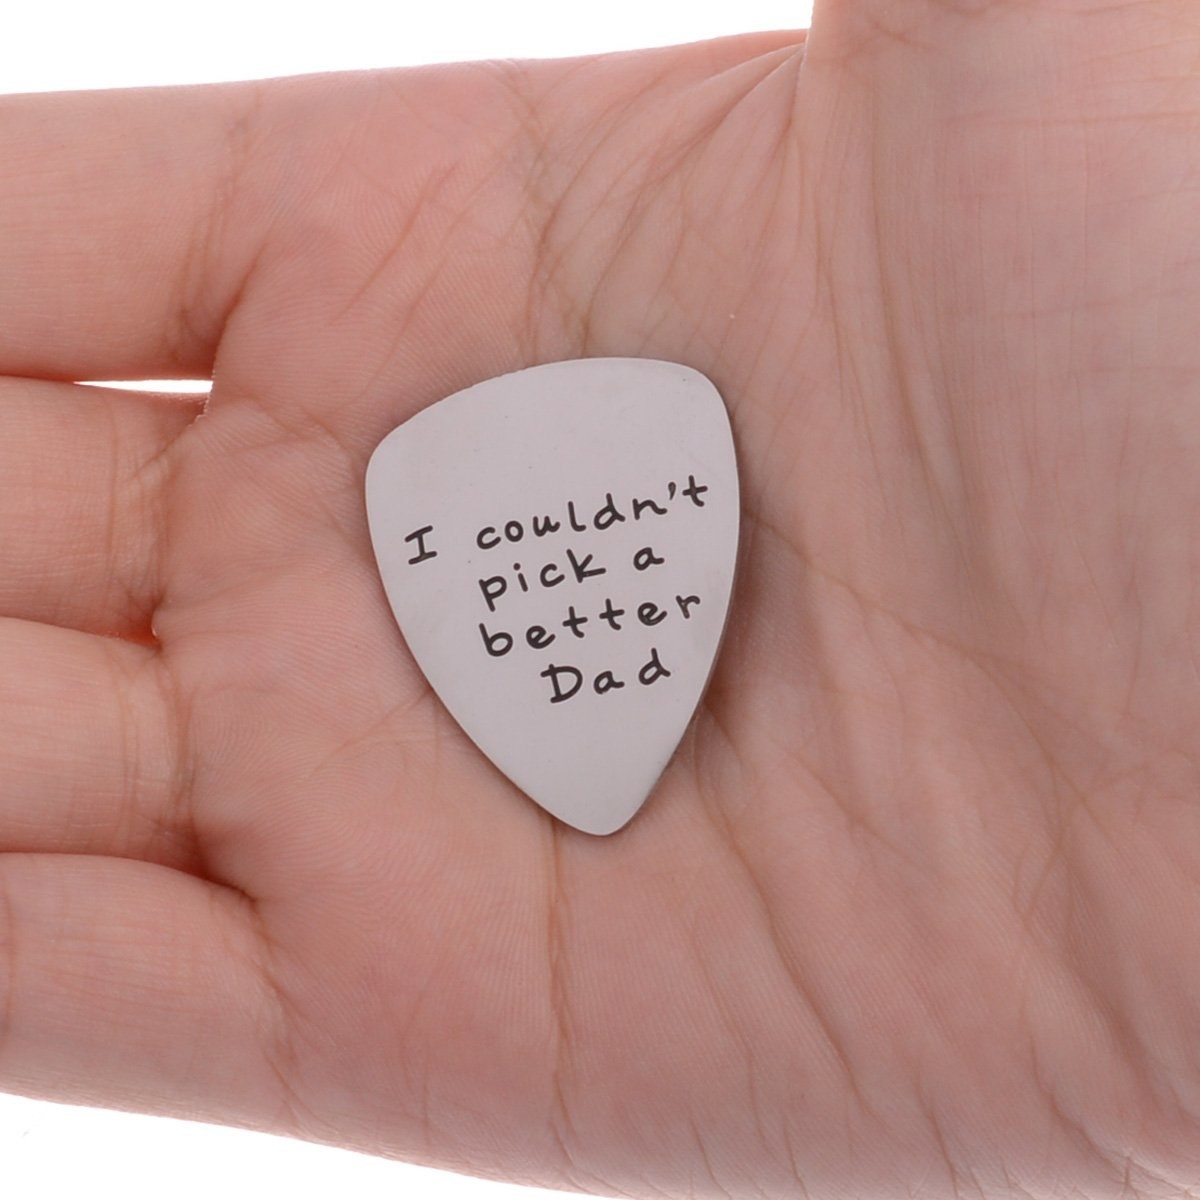 Fathers Day Gifts Keychain Dad Gifts from Daughter Son Christmas Gift Stocking Stuffers I Couldnt Pick a Better Dad Guitar Picks Funny Gift Ideas for Men Him Husband Daddy Birthday Gifts